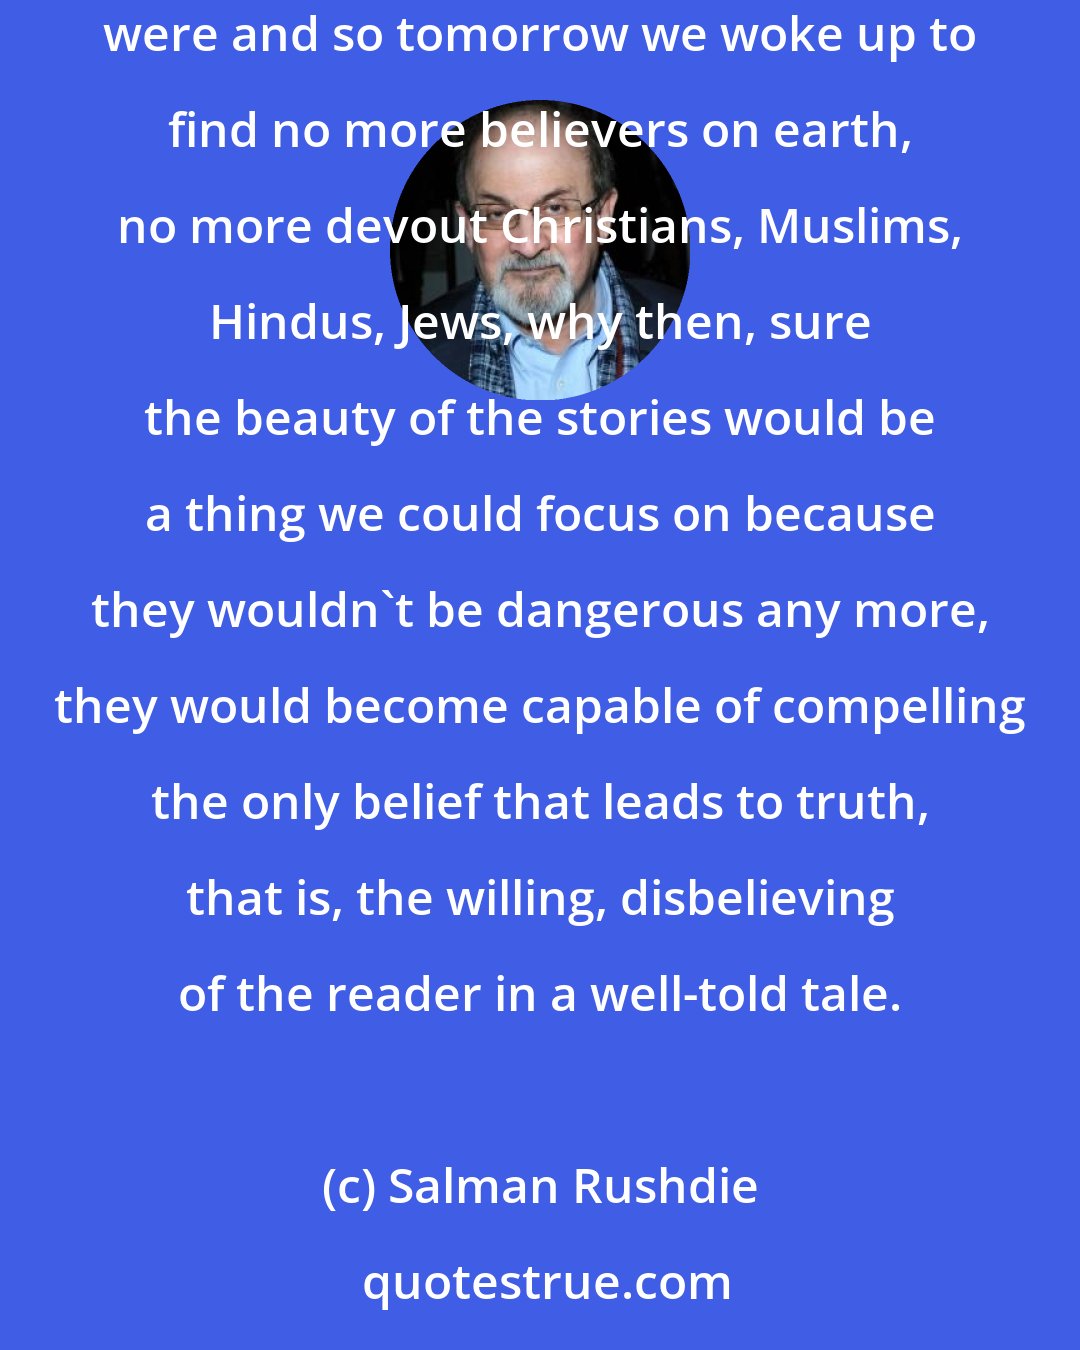 Salman Rushdie: When we stop believing in gods we can start believing in their stories, I retort. There are of course no such things as miracles, but if there were and so tomorrow we woke up to find no more believers on earth, no more devout Christians, Muslims, Hindus, Jews, why then, sure the beauty of the stories would be a thing we could focus on because they wouldn't be dangerous any more, they would become capable of compelling the only belief that leads to truth, that is, the willing, disbelieving of the reader in a well-told tale.